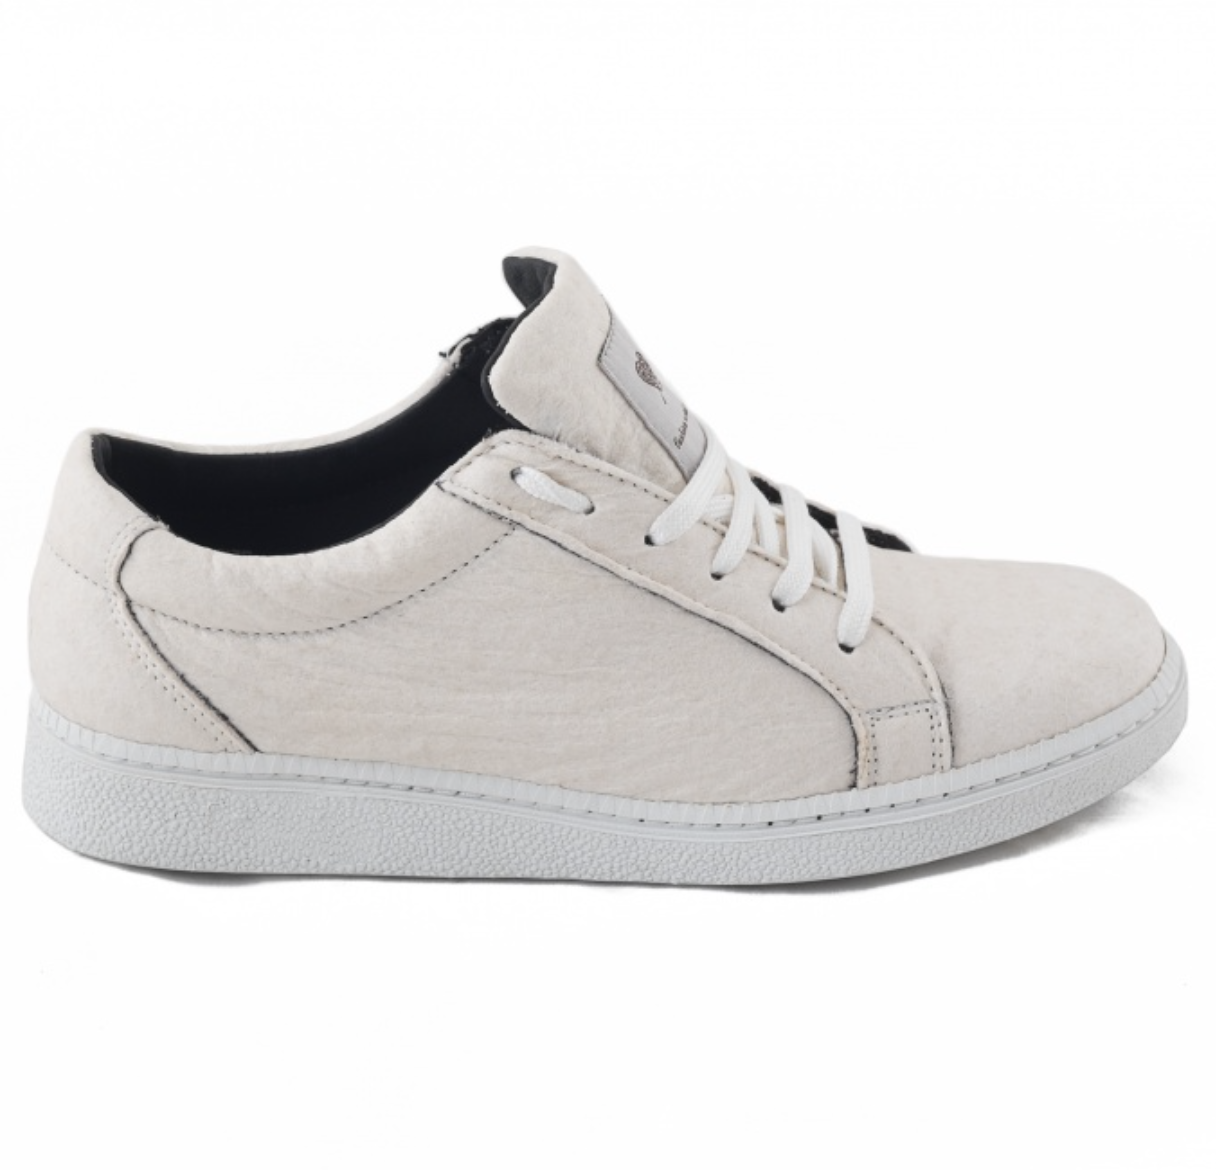 Unisex Basic White Piñatex™ Sneakers - The Grinning Goat